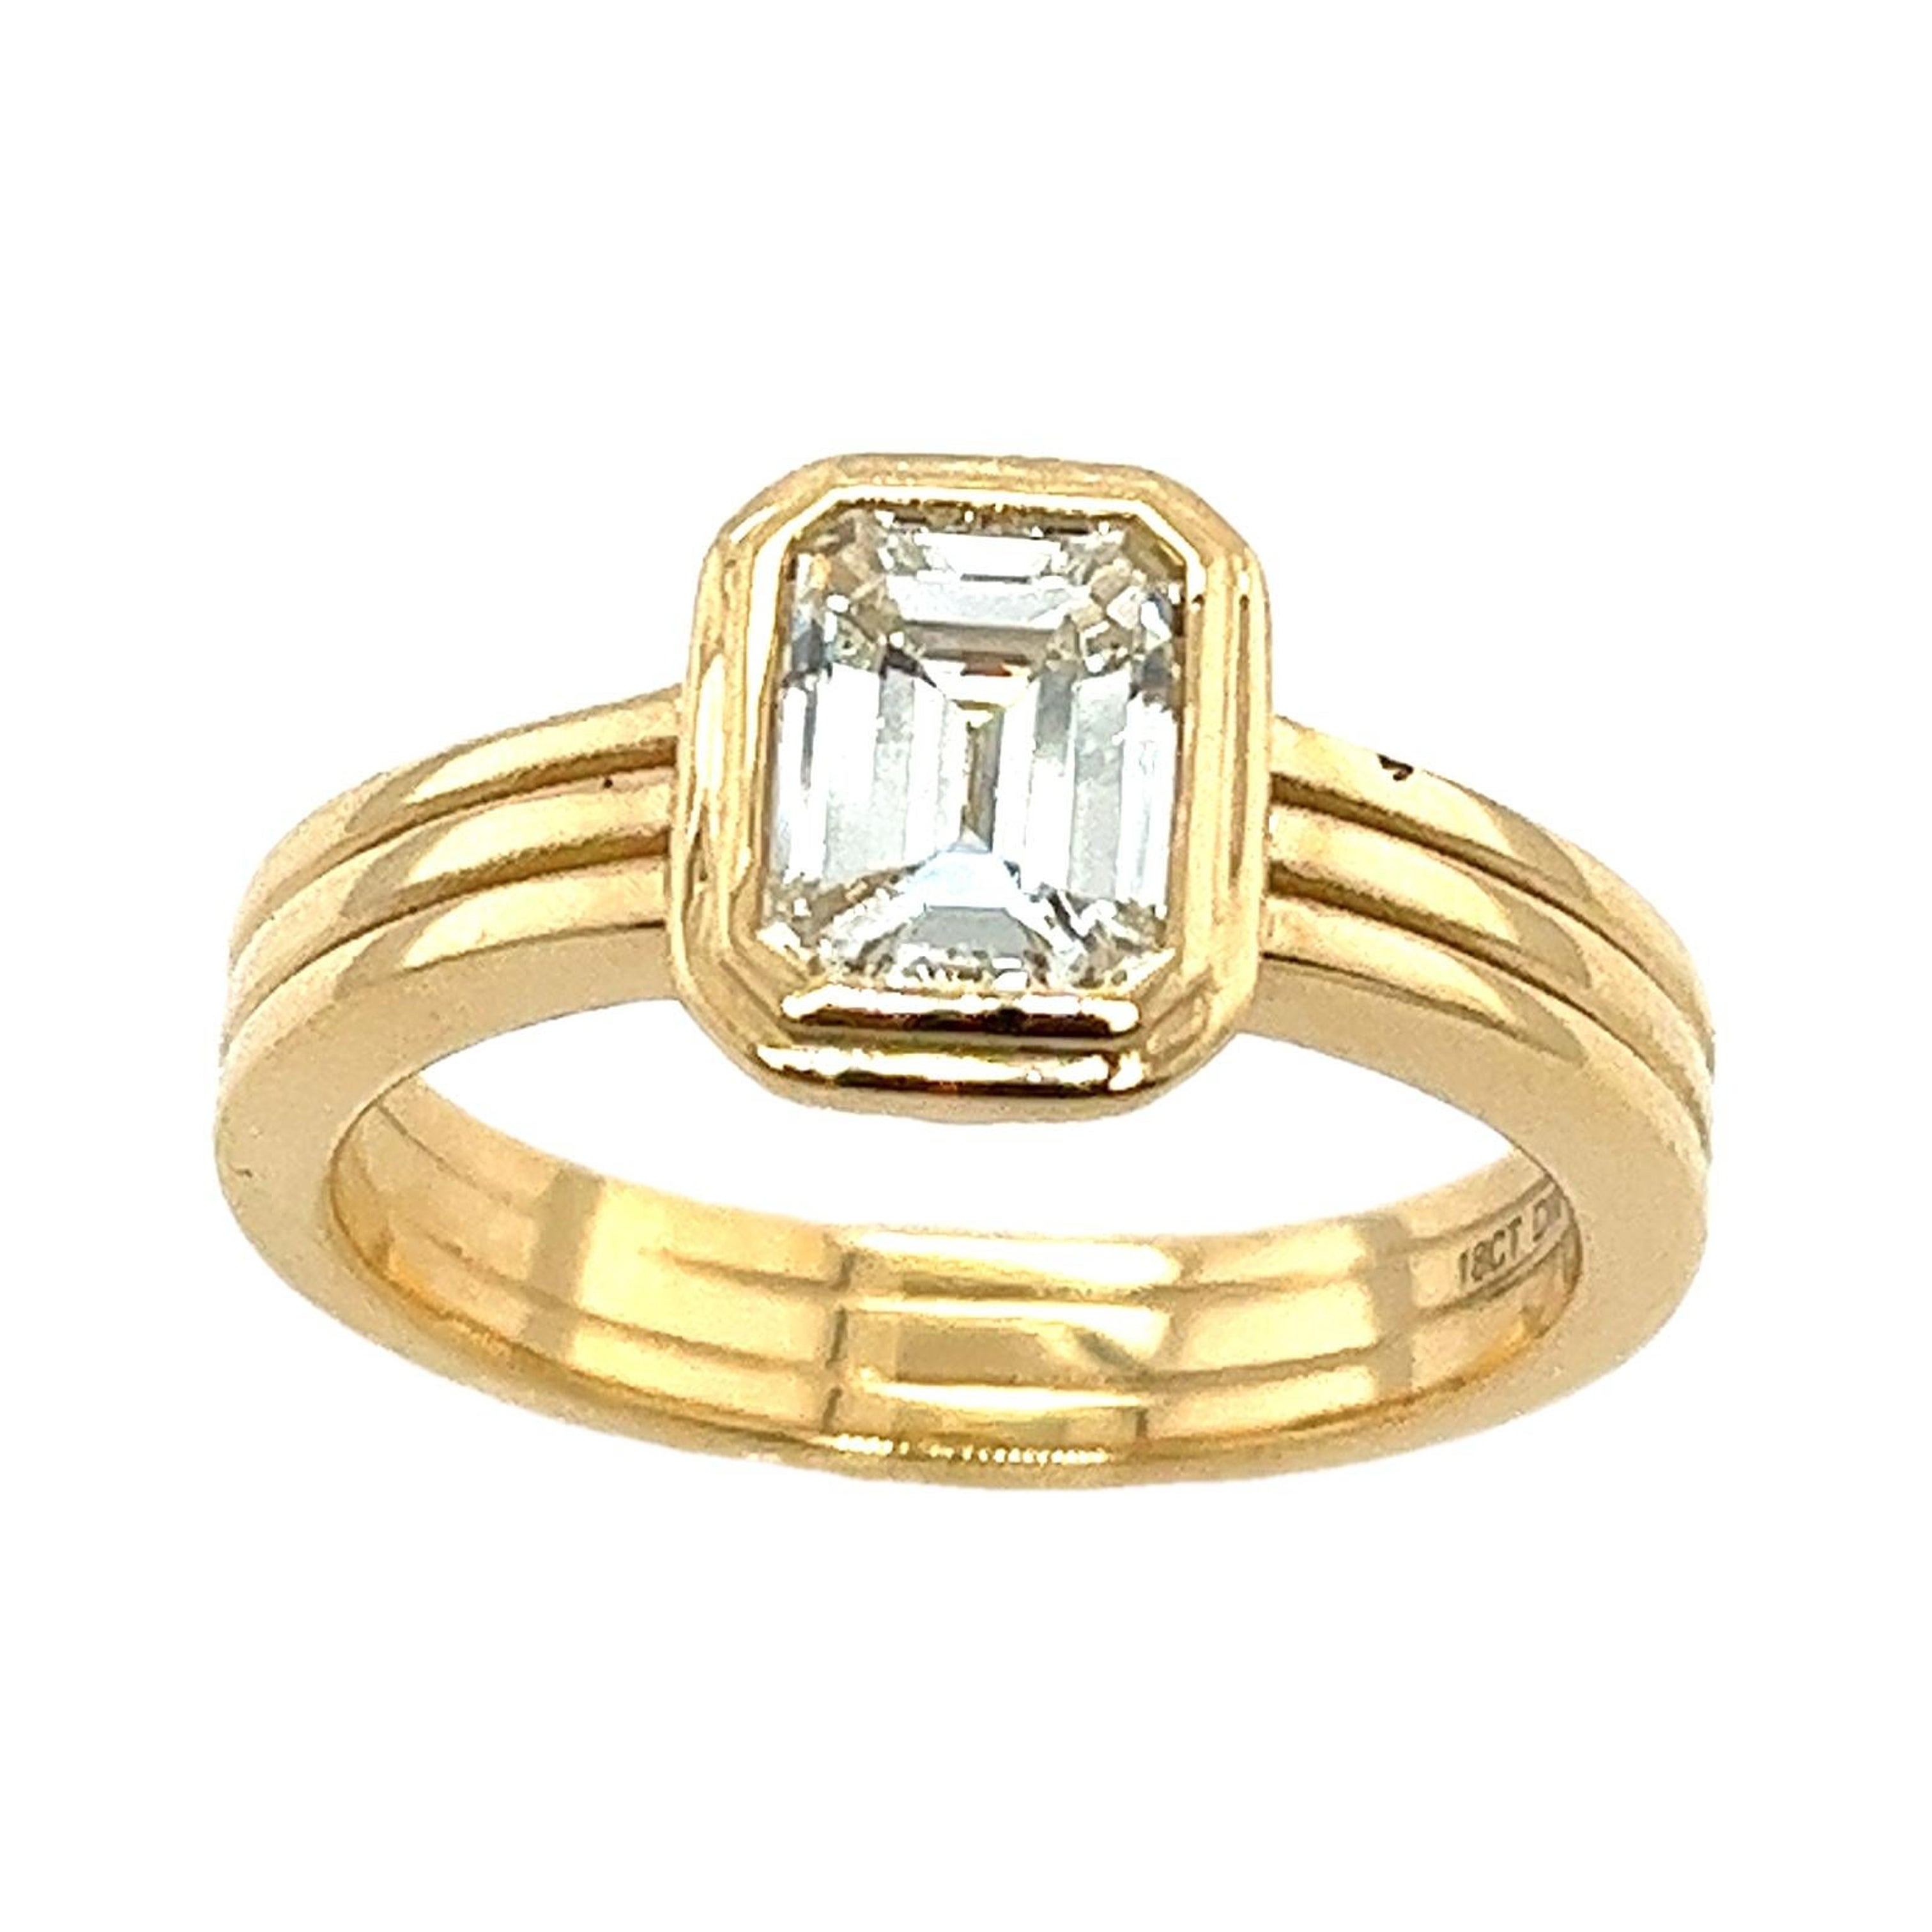 Diamond Solitaire Ring Set With 1.01ct K/VS2 Emerald Cut Diamond, In 18ct Gold